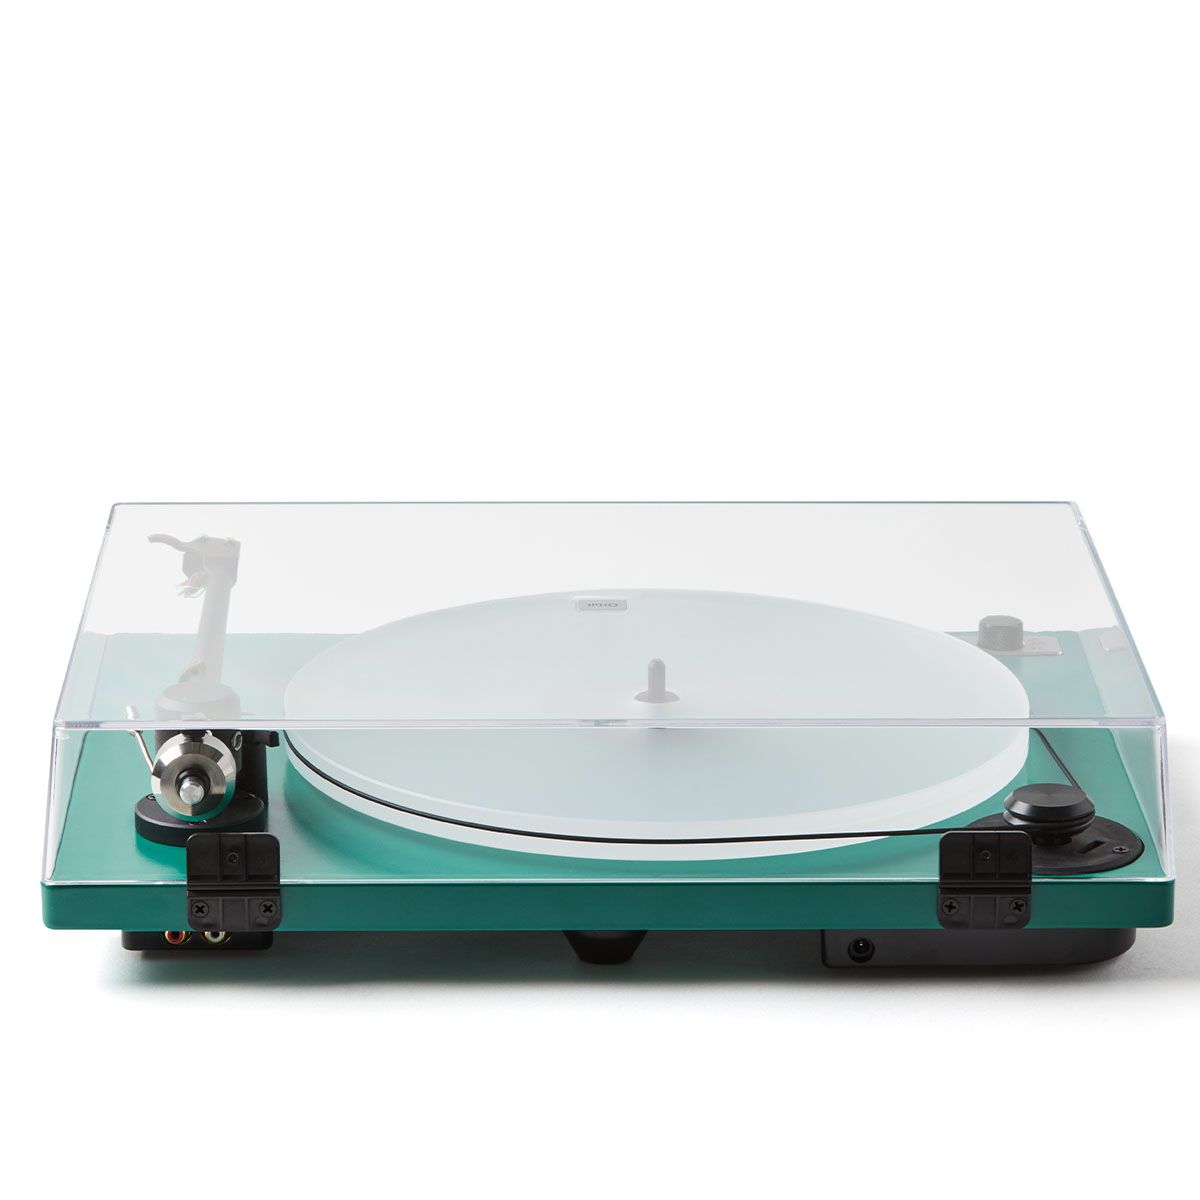 U-Turn Audio Orbit 2 Special Turntable - rear inputs without preamp - green